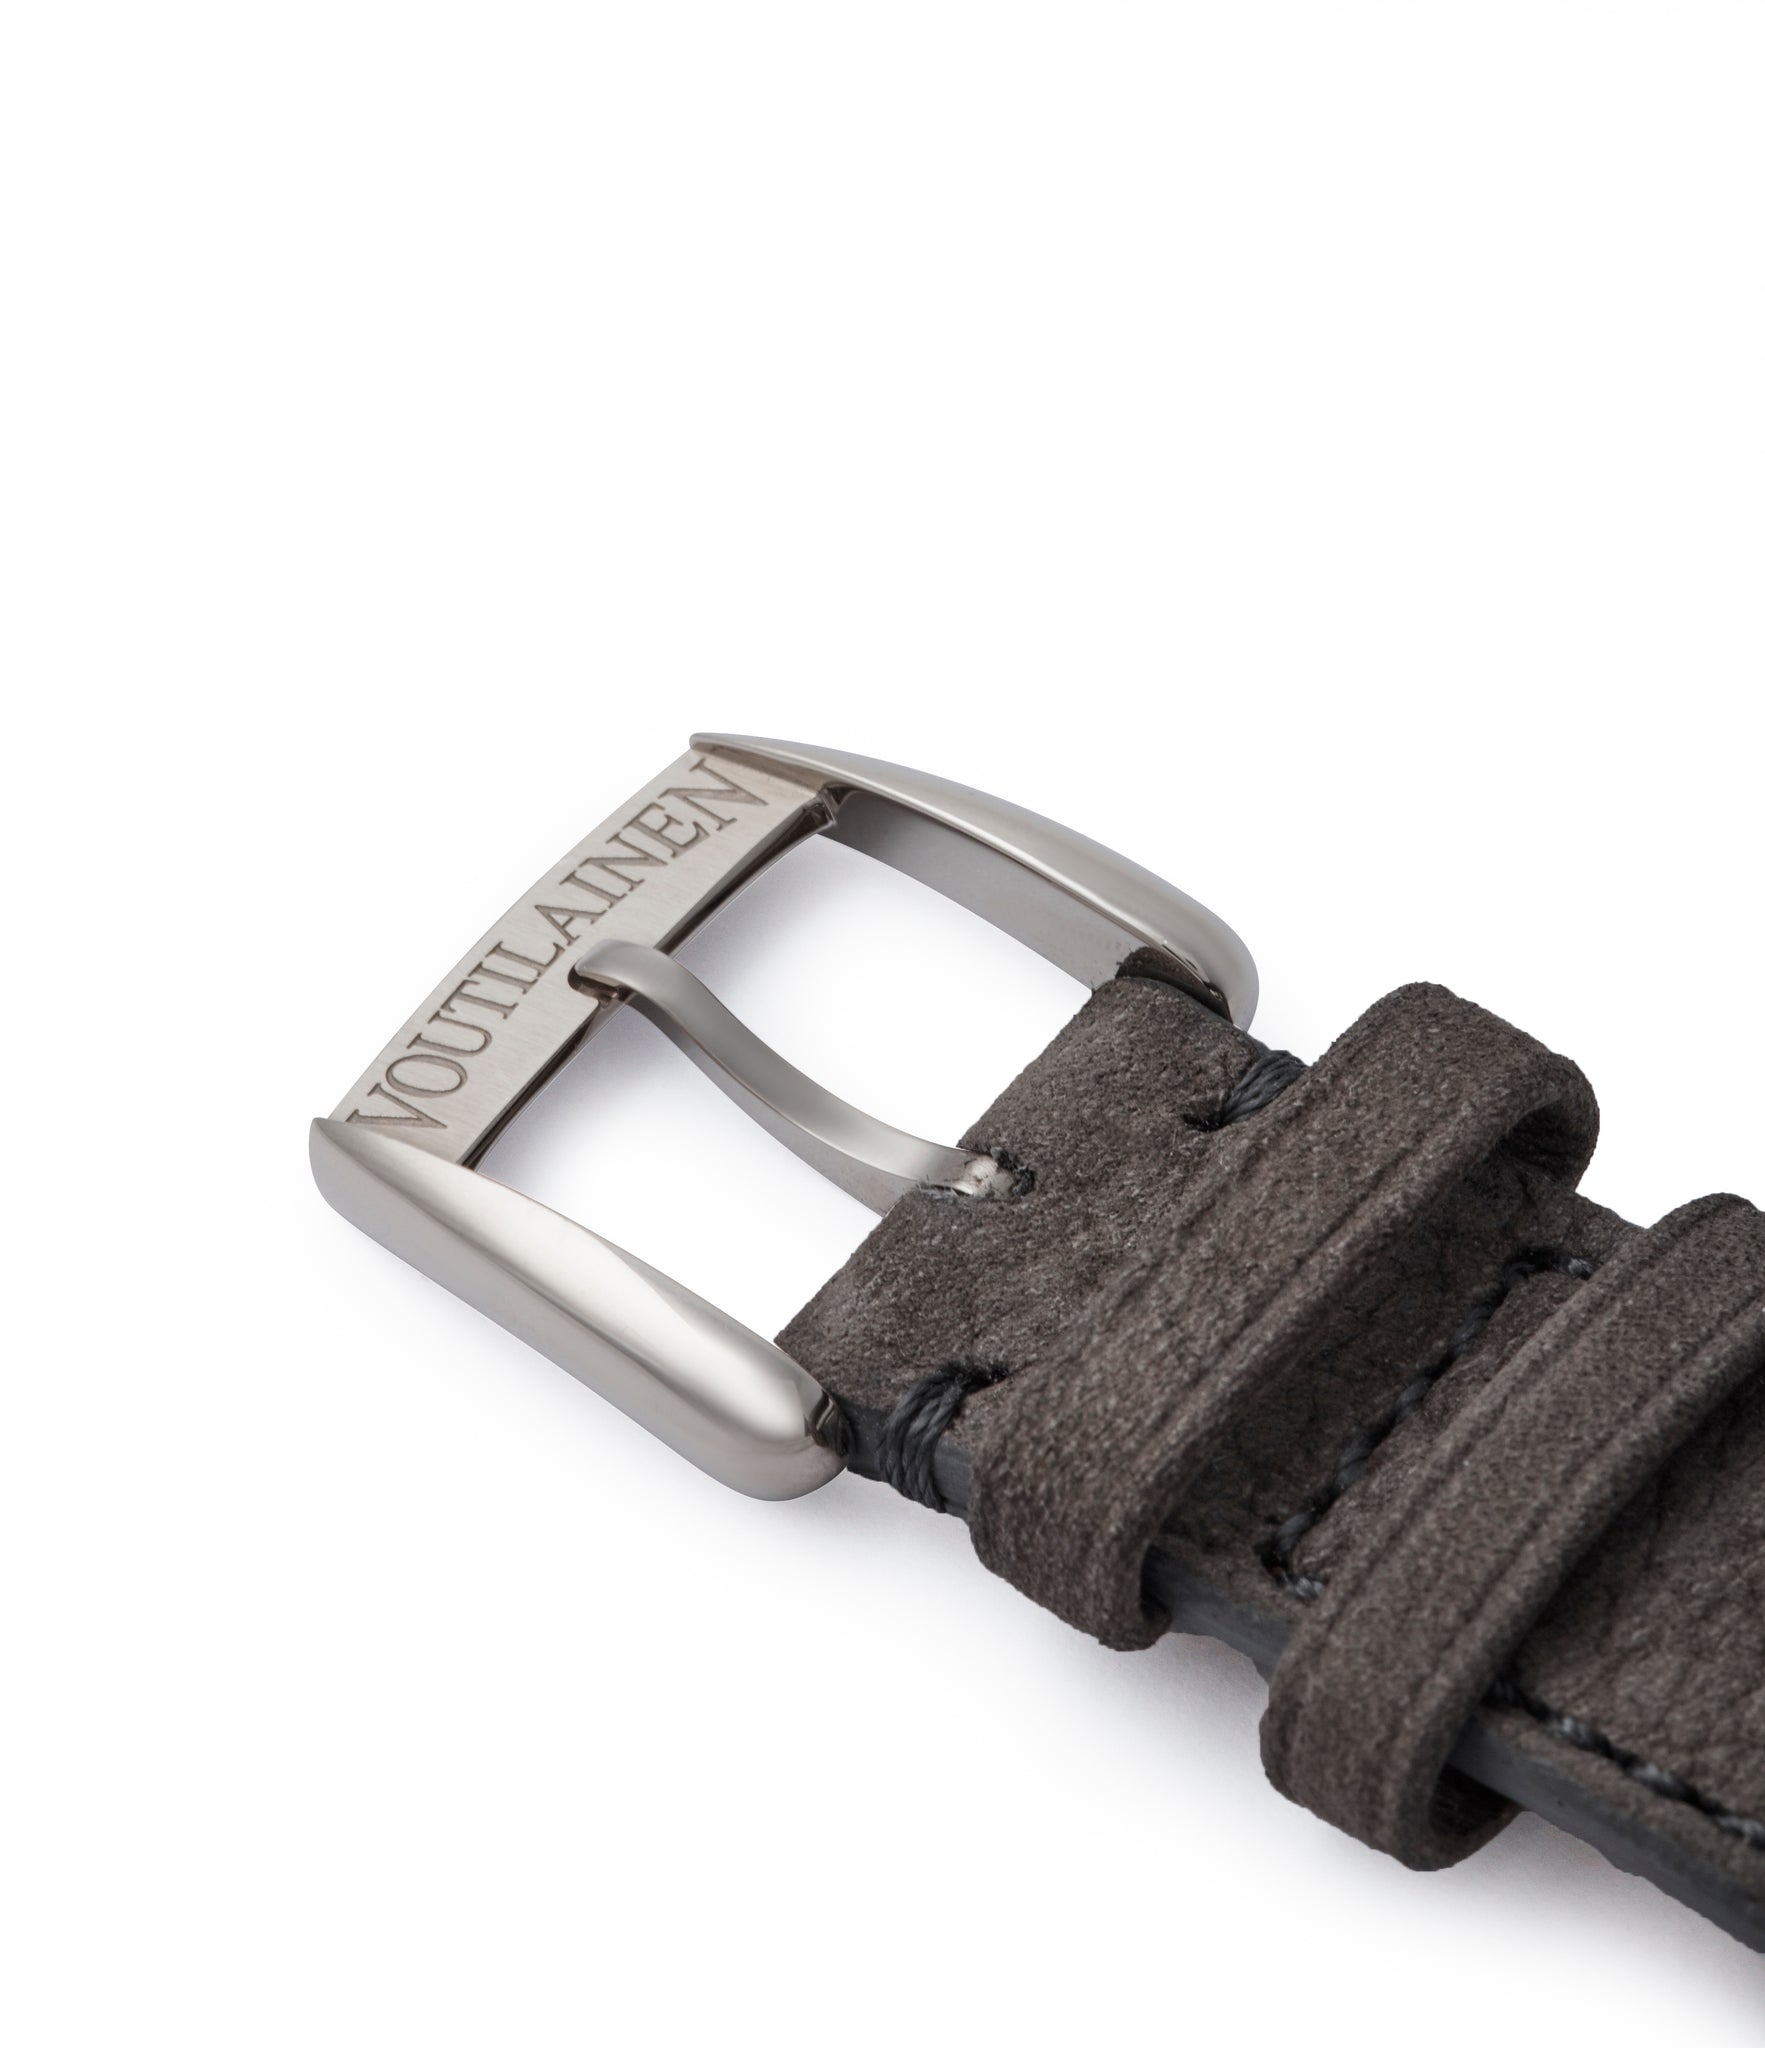 Helsinki grey nubuck watch strap Voutilainen Masterpiece Chronograph II Unique Piece steel watch for sale A Collected Man London UK approved reseller of Voutilainen